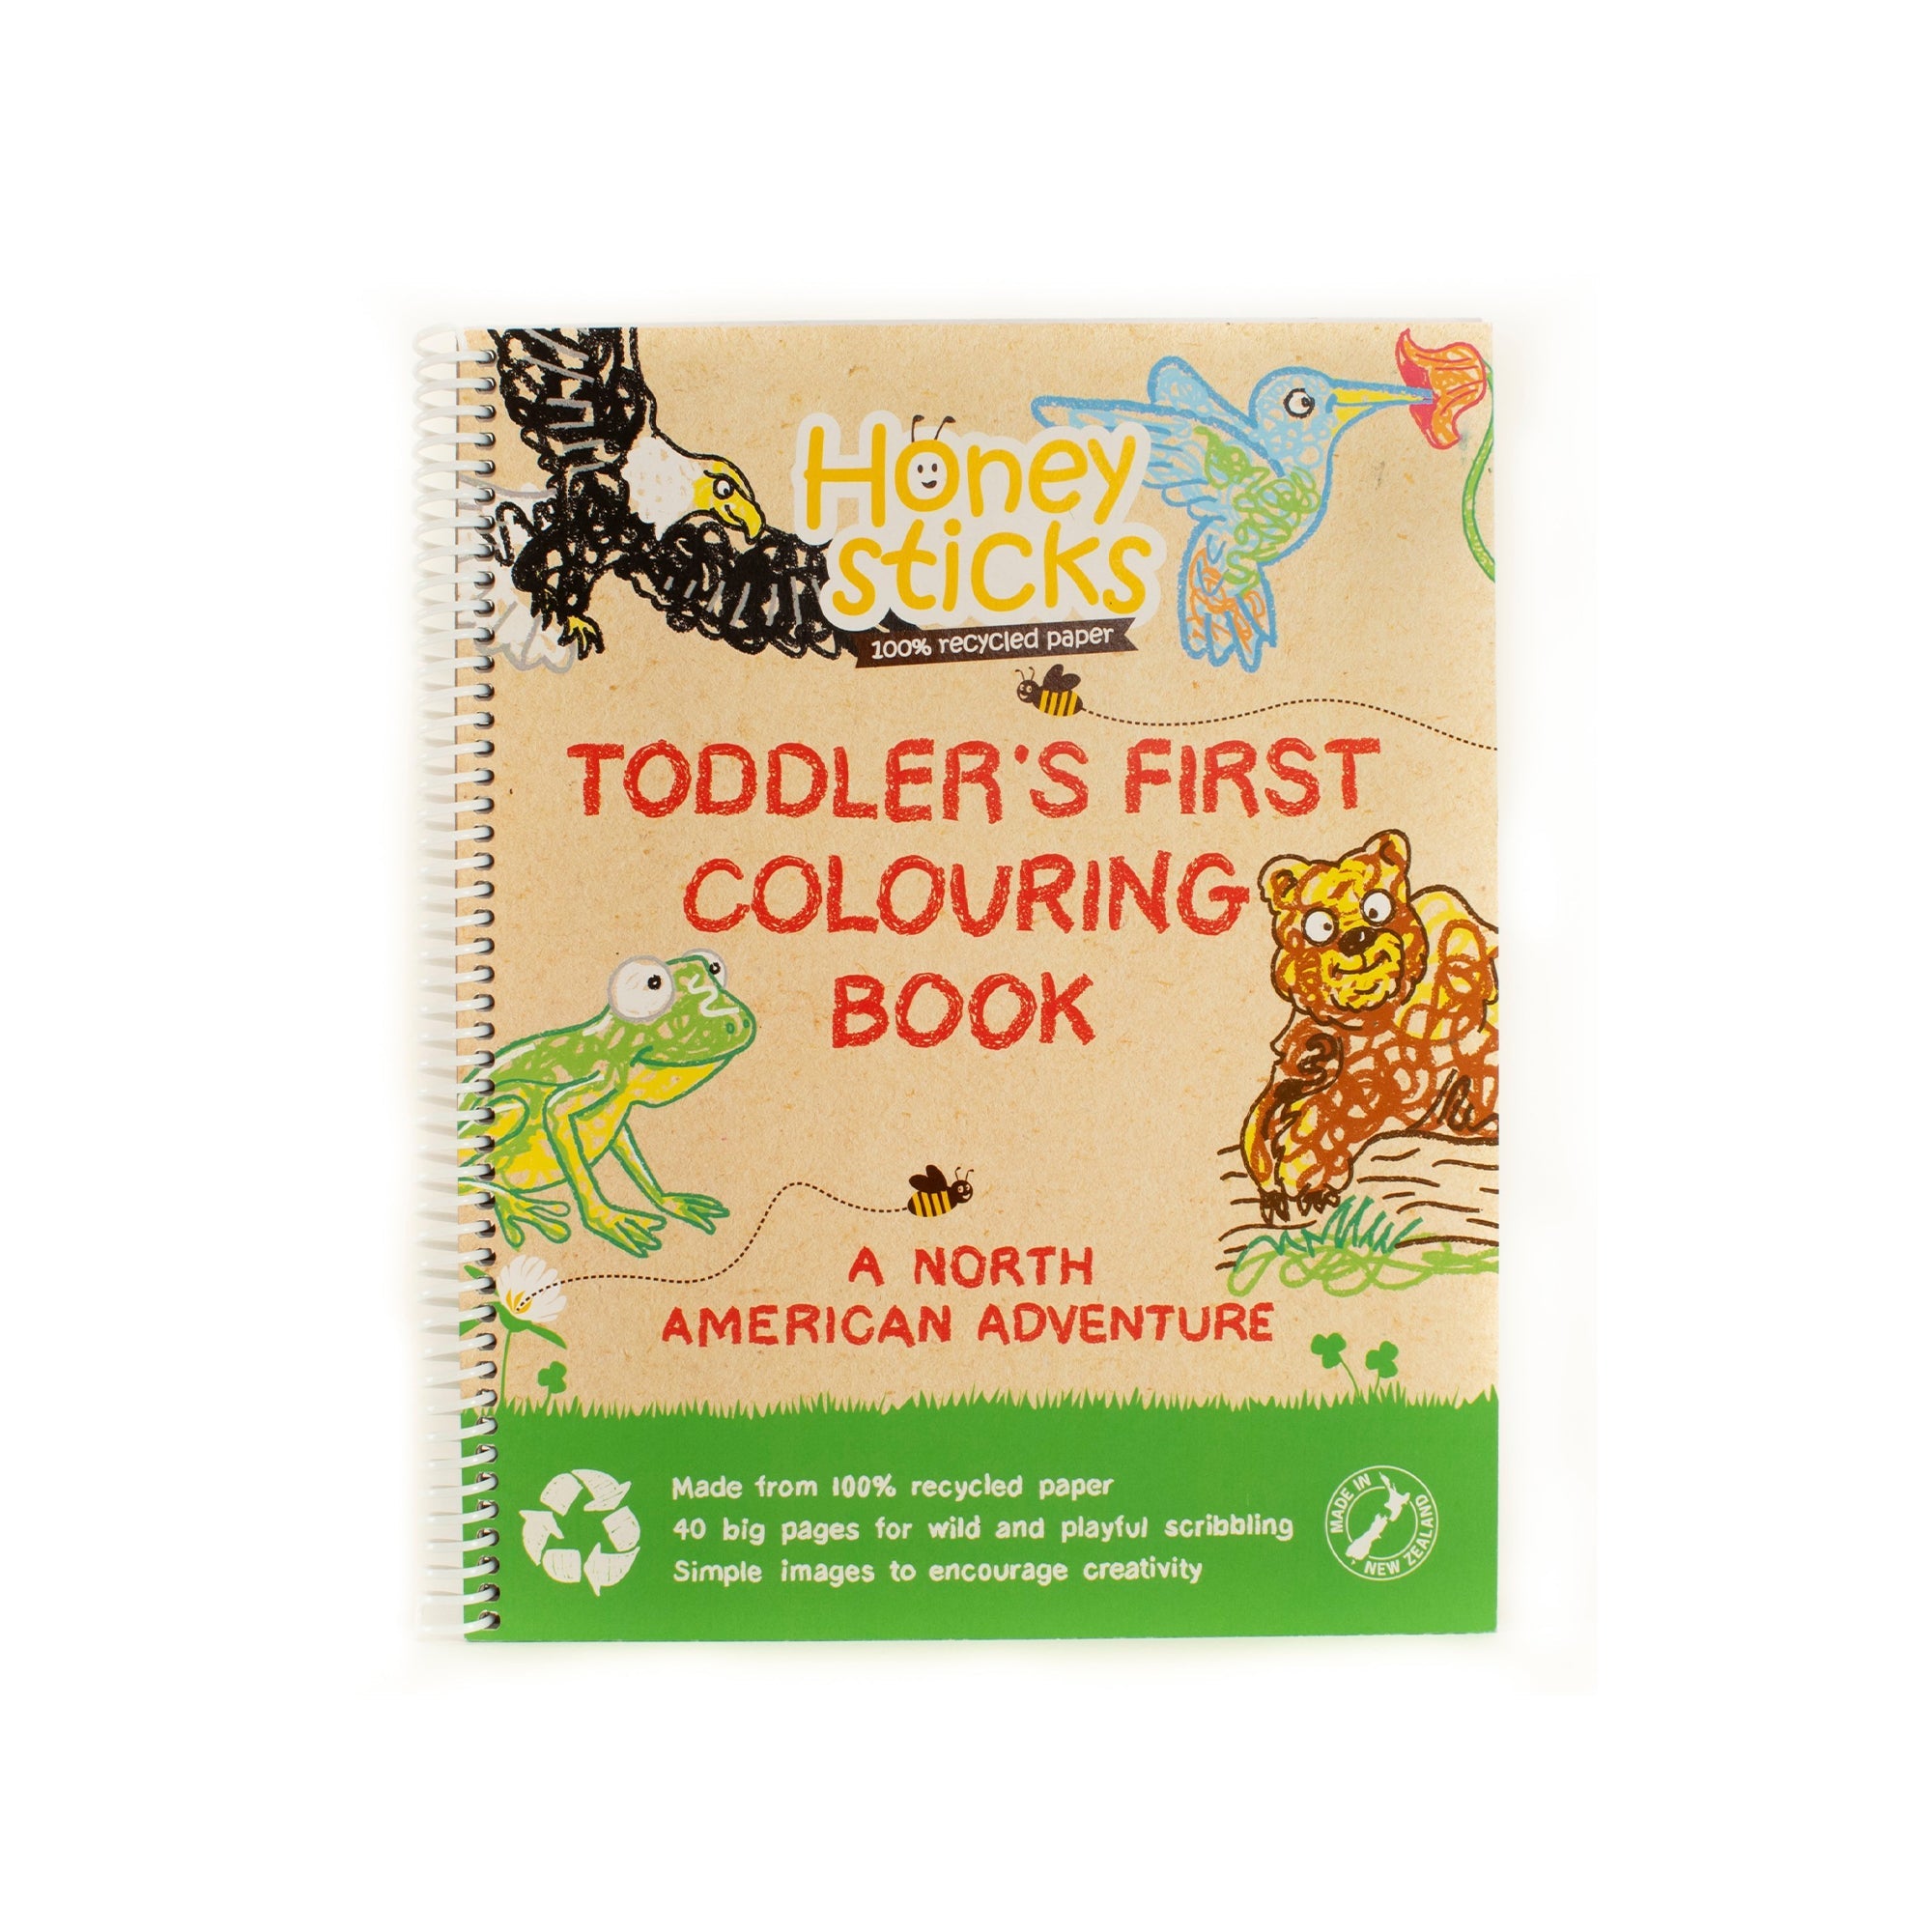 Honeysticks USA Toddlers First Colouring Book - A North American Adventure by Honeysticks USA Scribbling